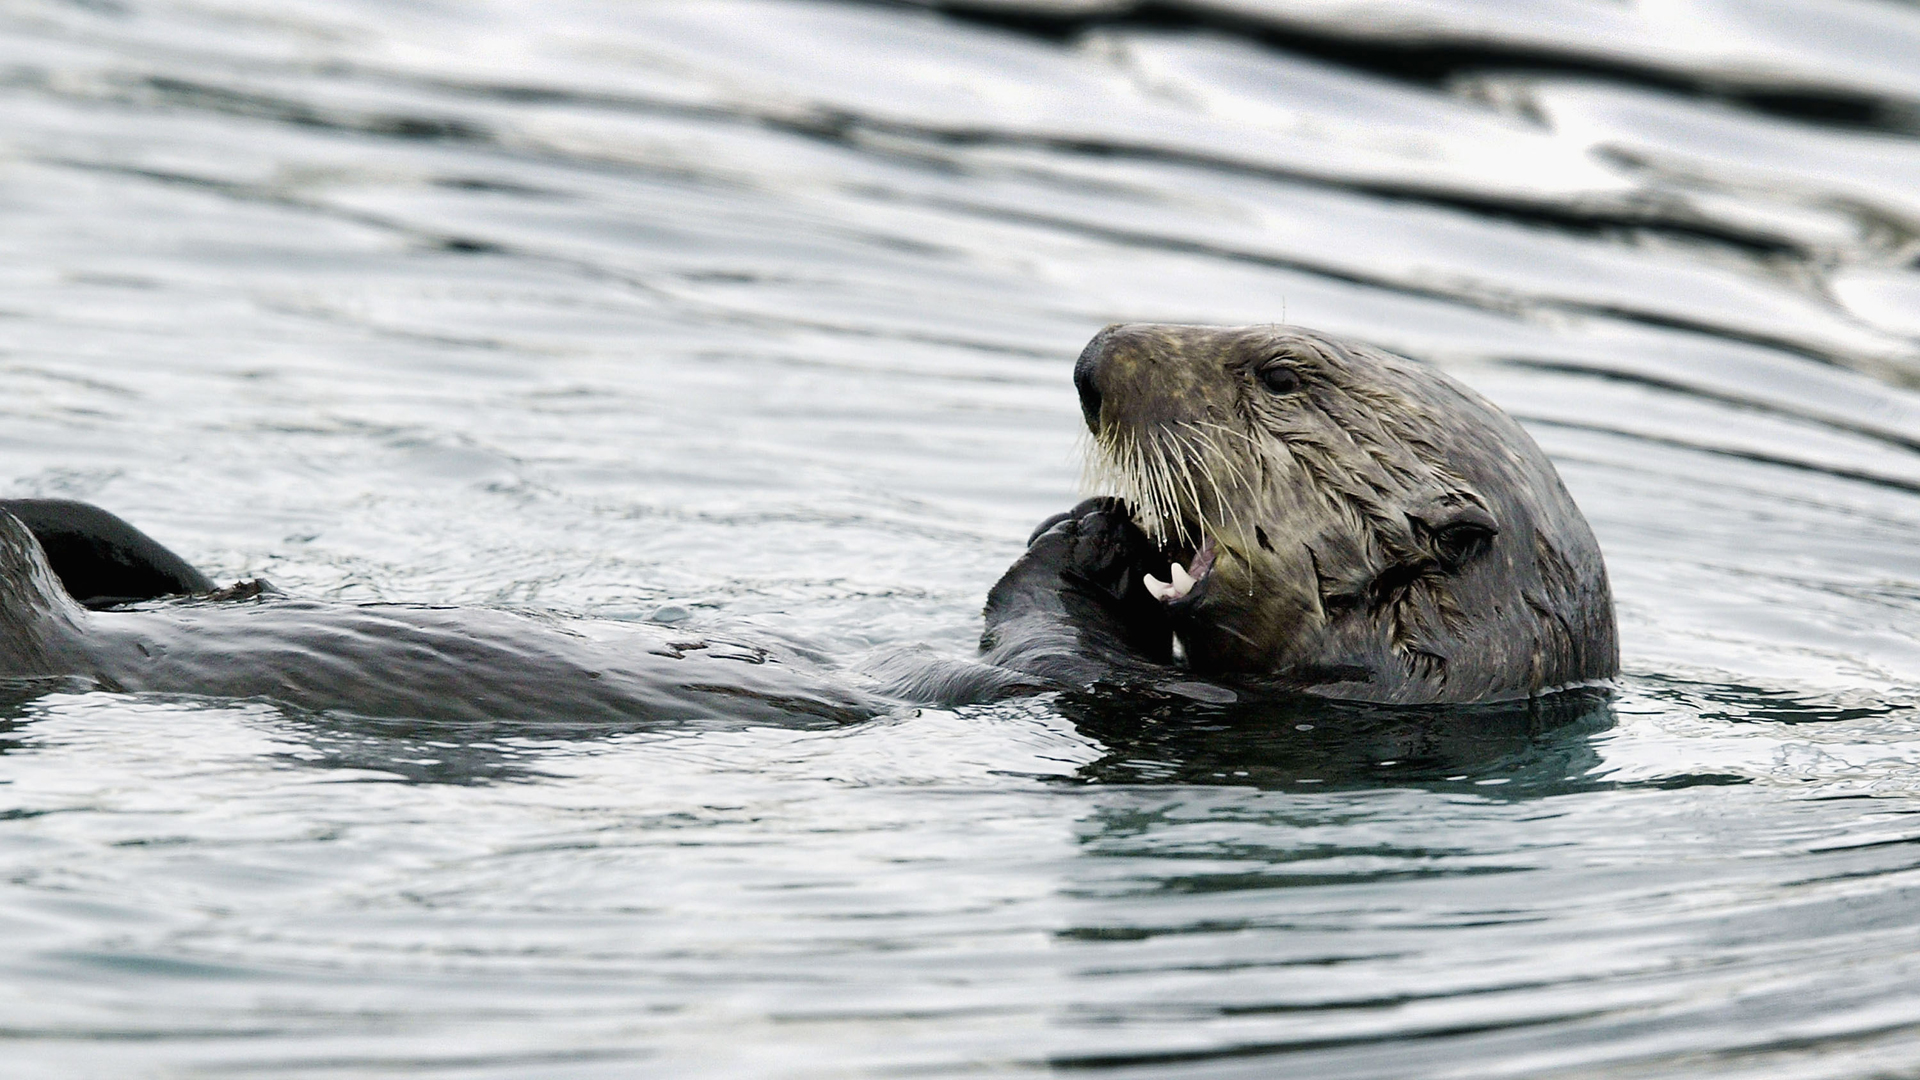 A Sea Otter Is Seen In A File Photo - Dead Washed Up Otter - HD Wallpaper 